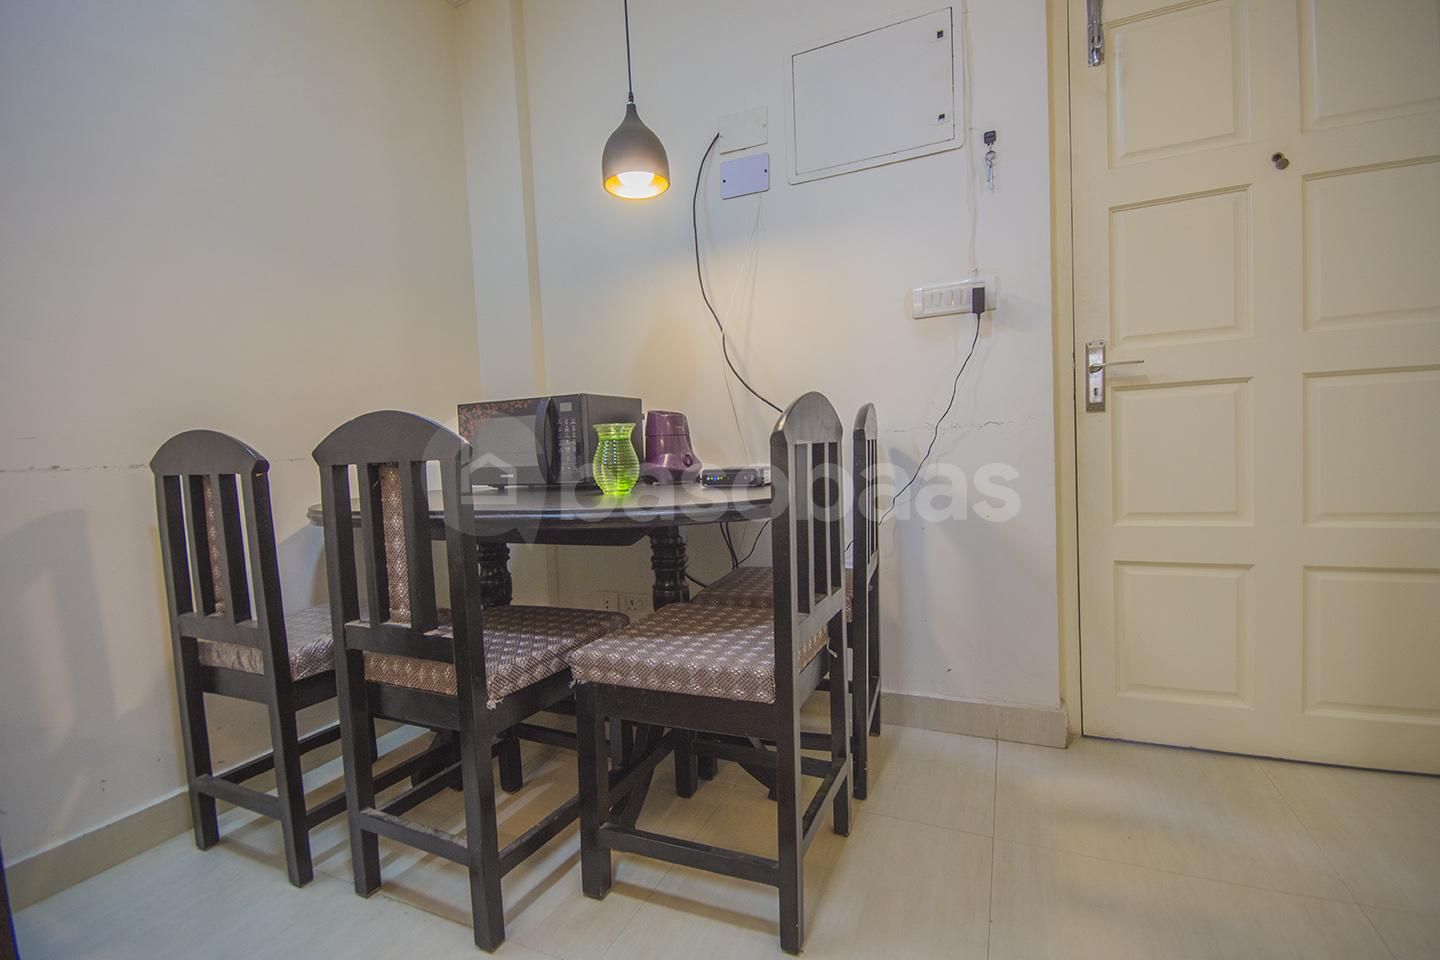 SOLD OUT: Apartment : Apartment for Sale in Jhamsikhel, Lalitpur Image 15